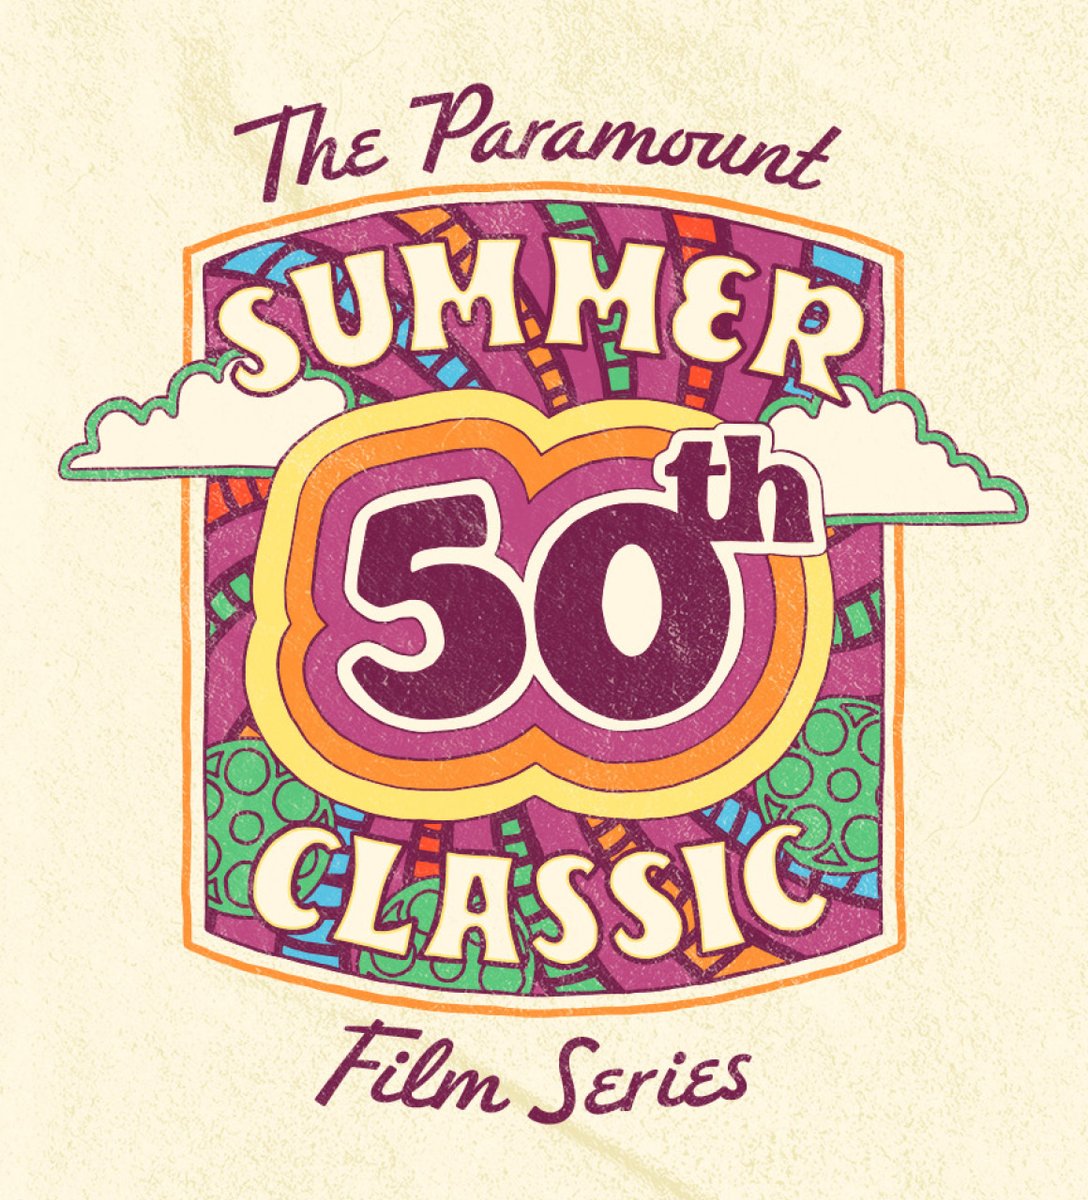 It's an Austin tradition - when the summer heats up, it's time to cool off in the Paramount Theatre! The Summer Classic Film Series is turning 50 this year, and they're celebrating with special guests, themed events and more! See the full schedule here. bit.ly/3UXN3cY